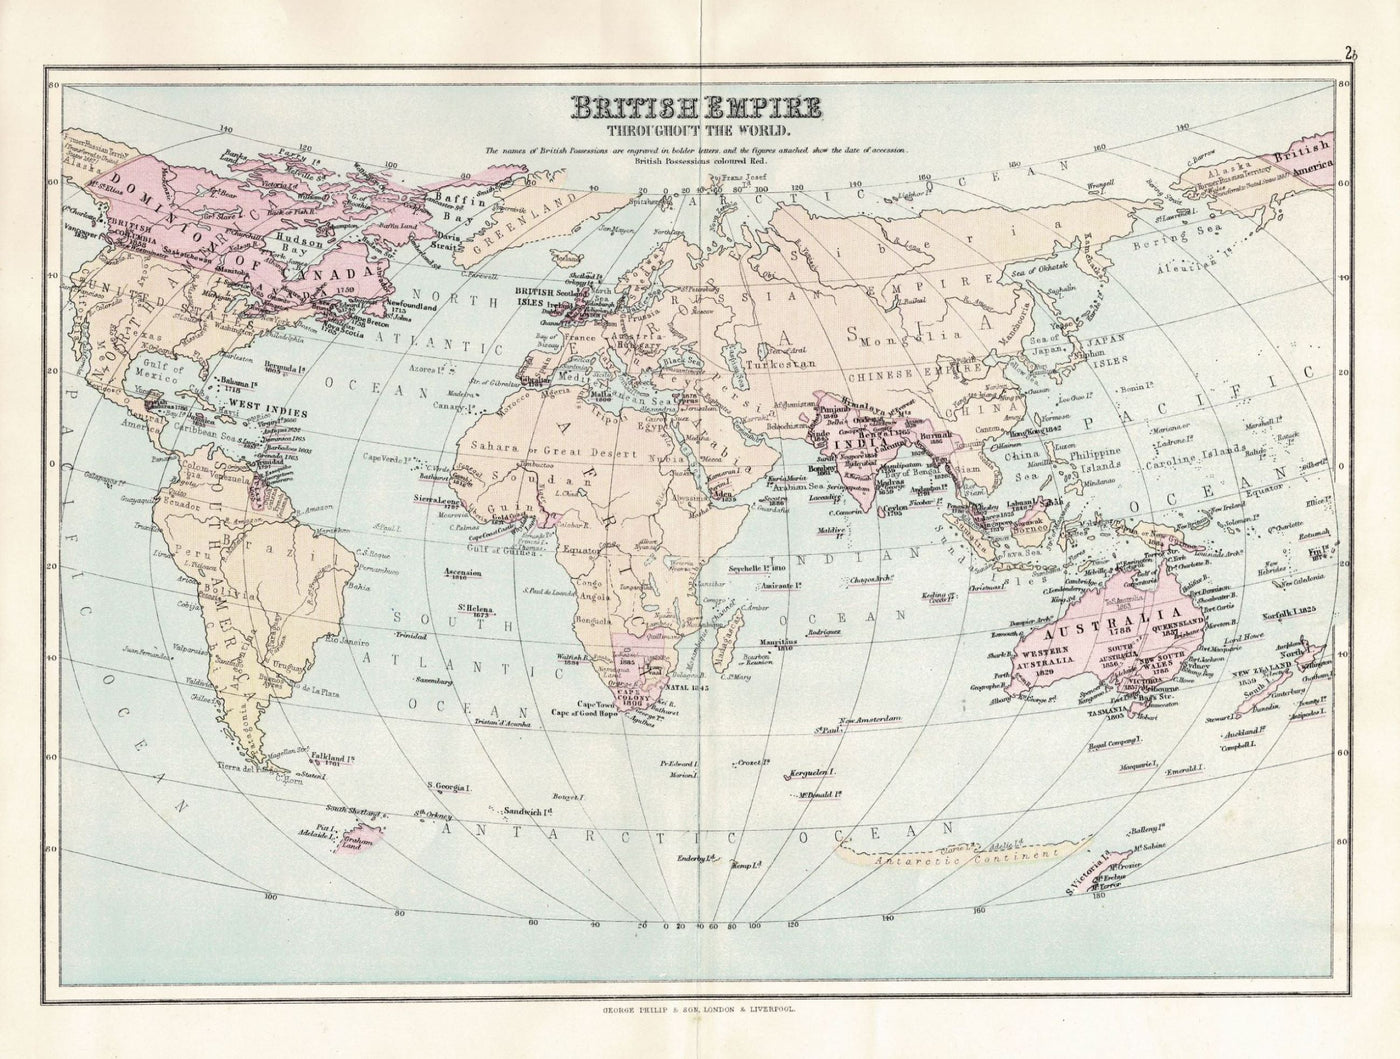 British Empire throughout the World antique map, 1891